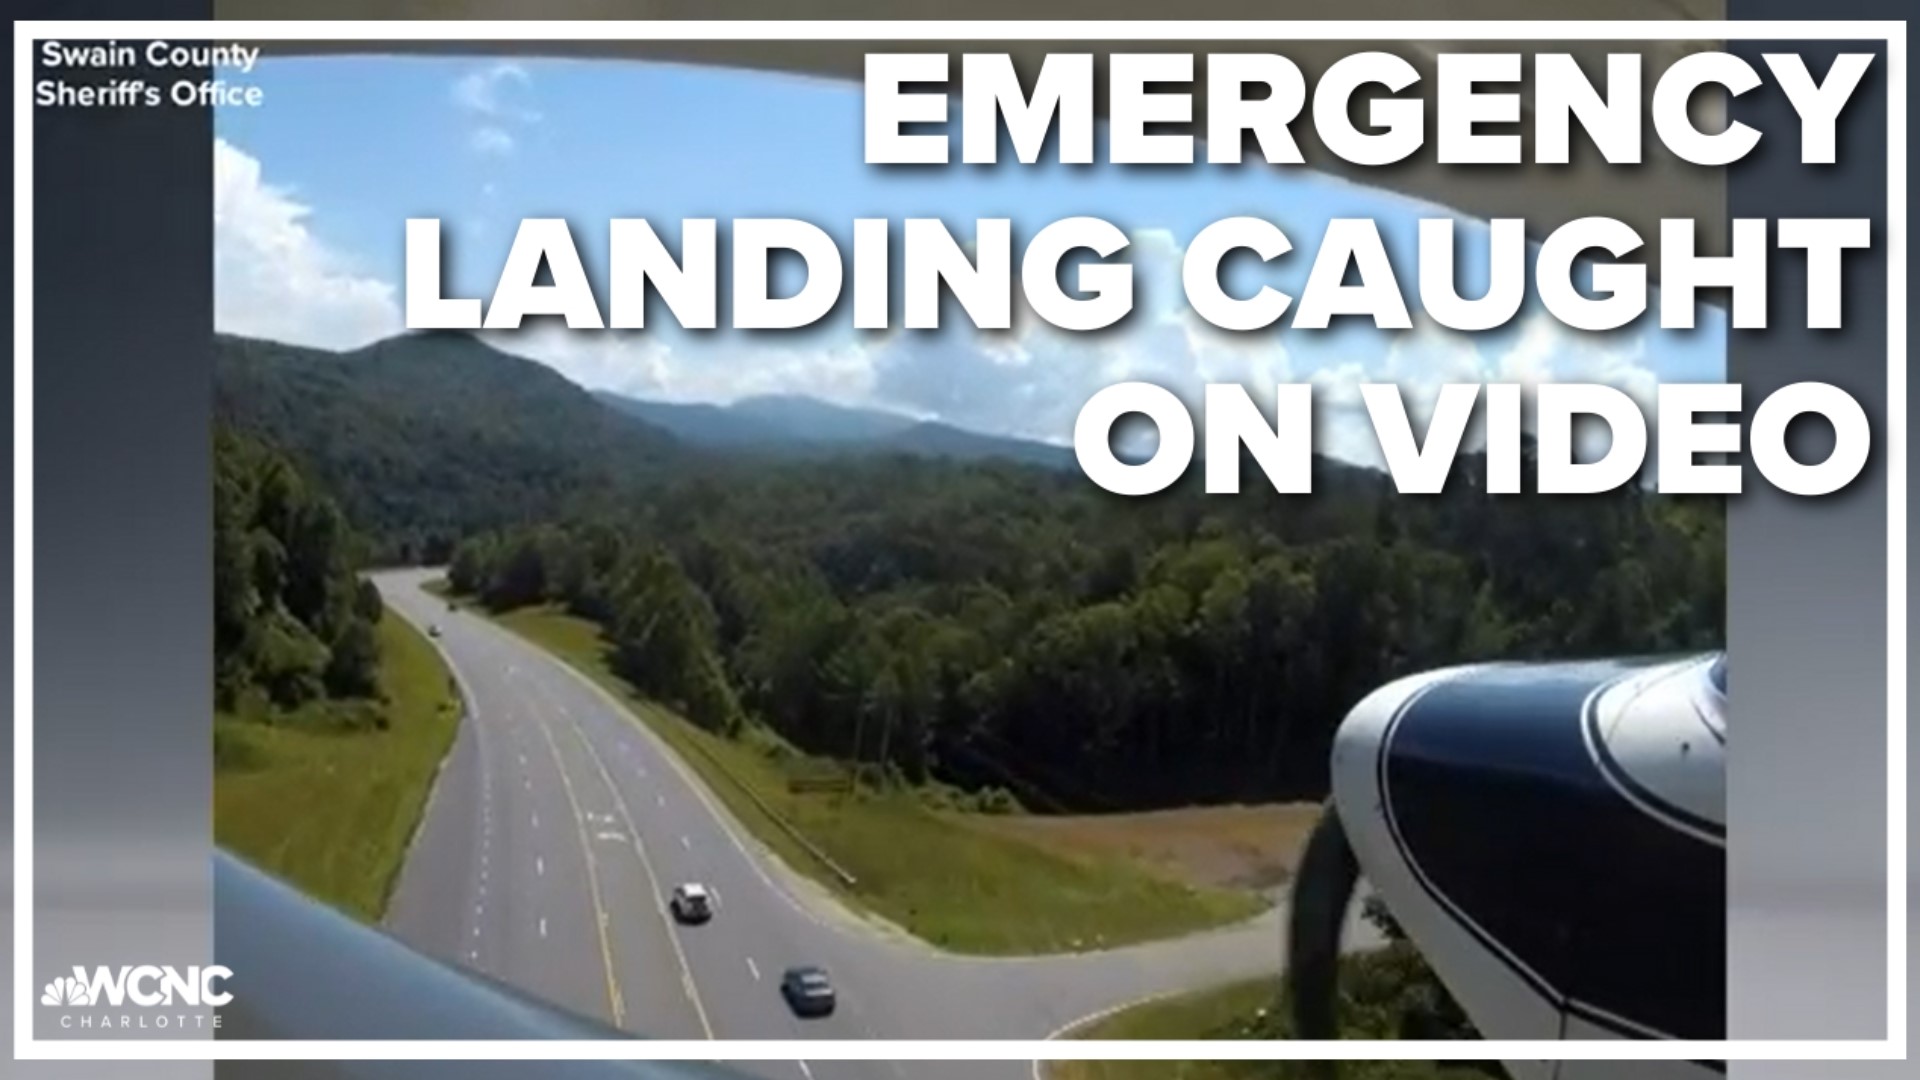 A plane's emergency landing was caught on video out of Swain County.